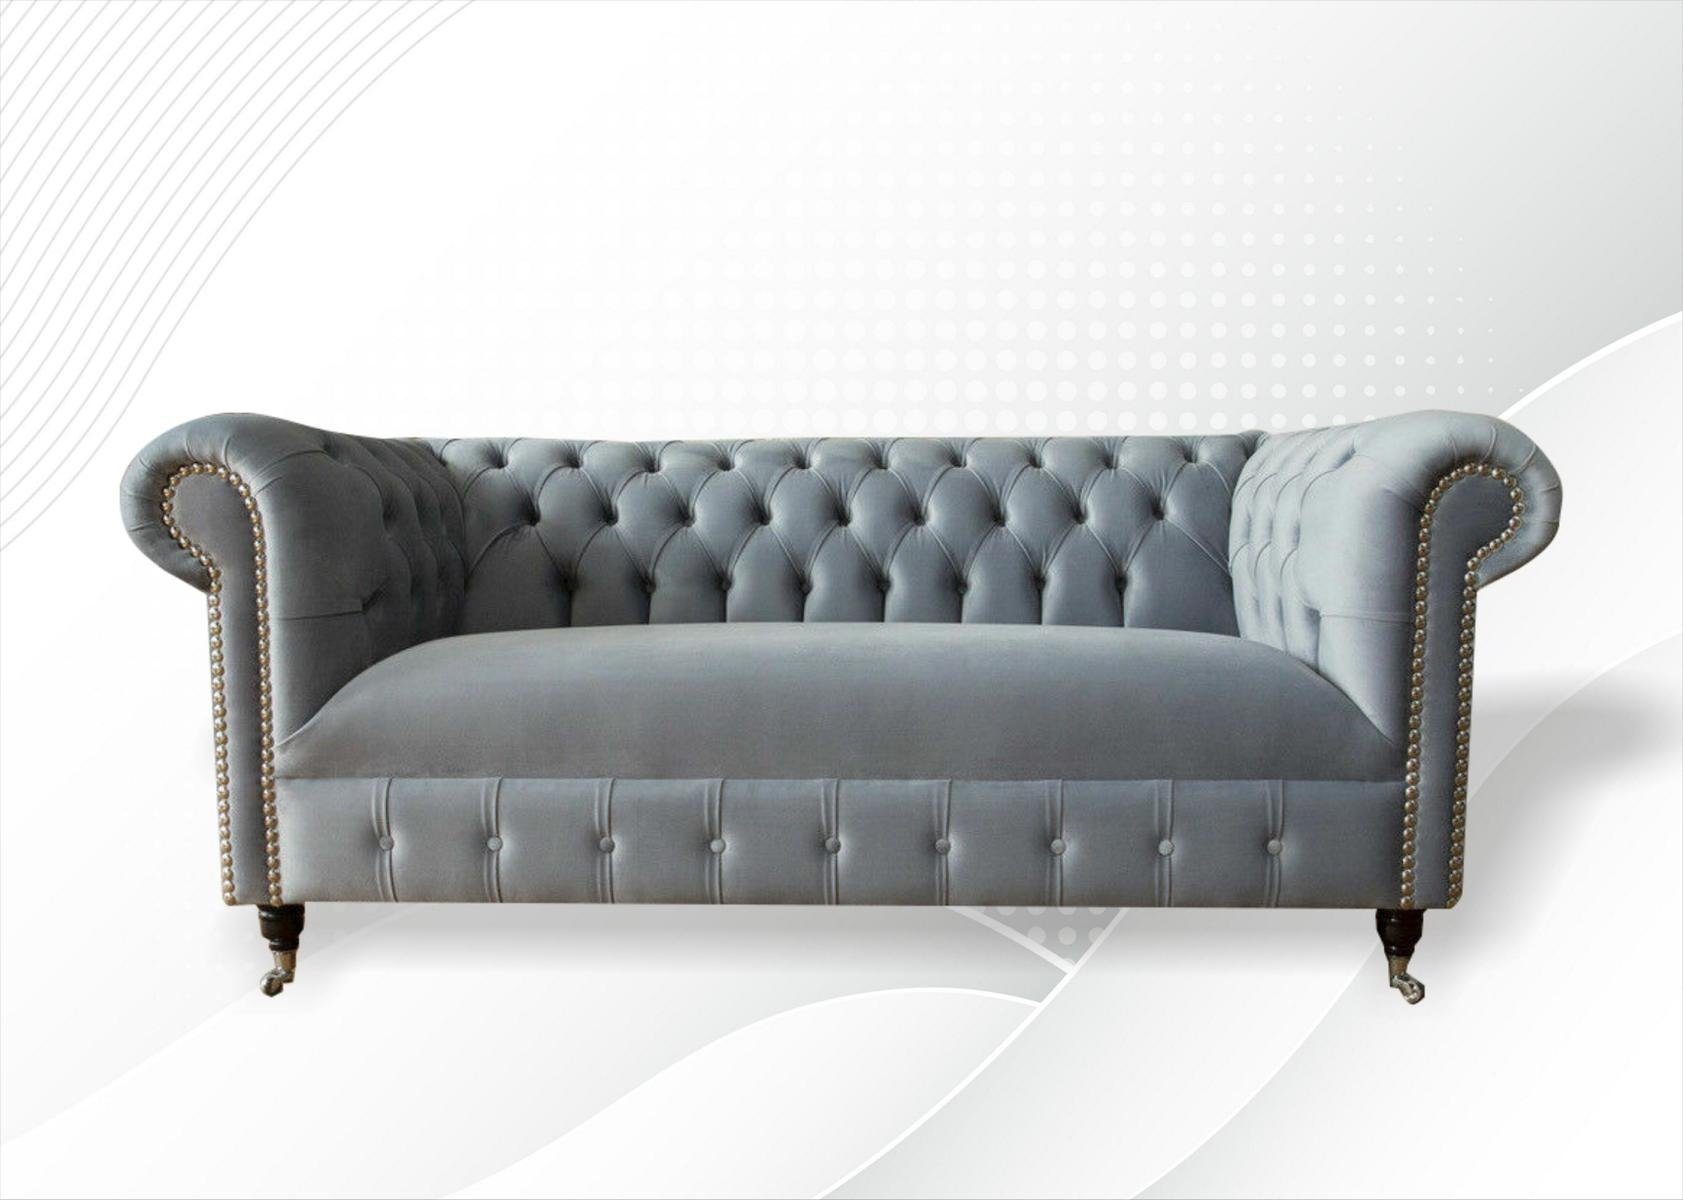 JVmoebel Sofa Chesterfield Made Sofa Textilmöbel, Couchen Couch Europe Stoff in Polster Leder